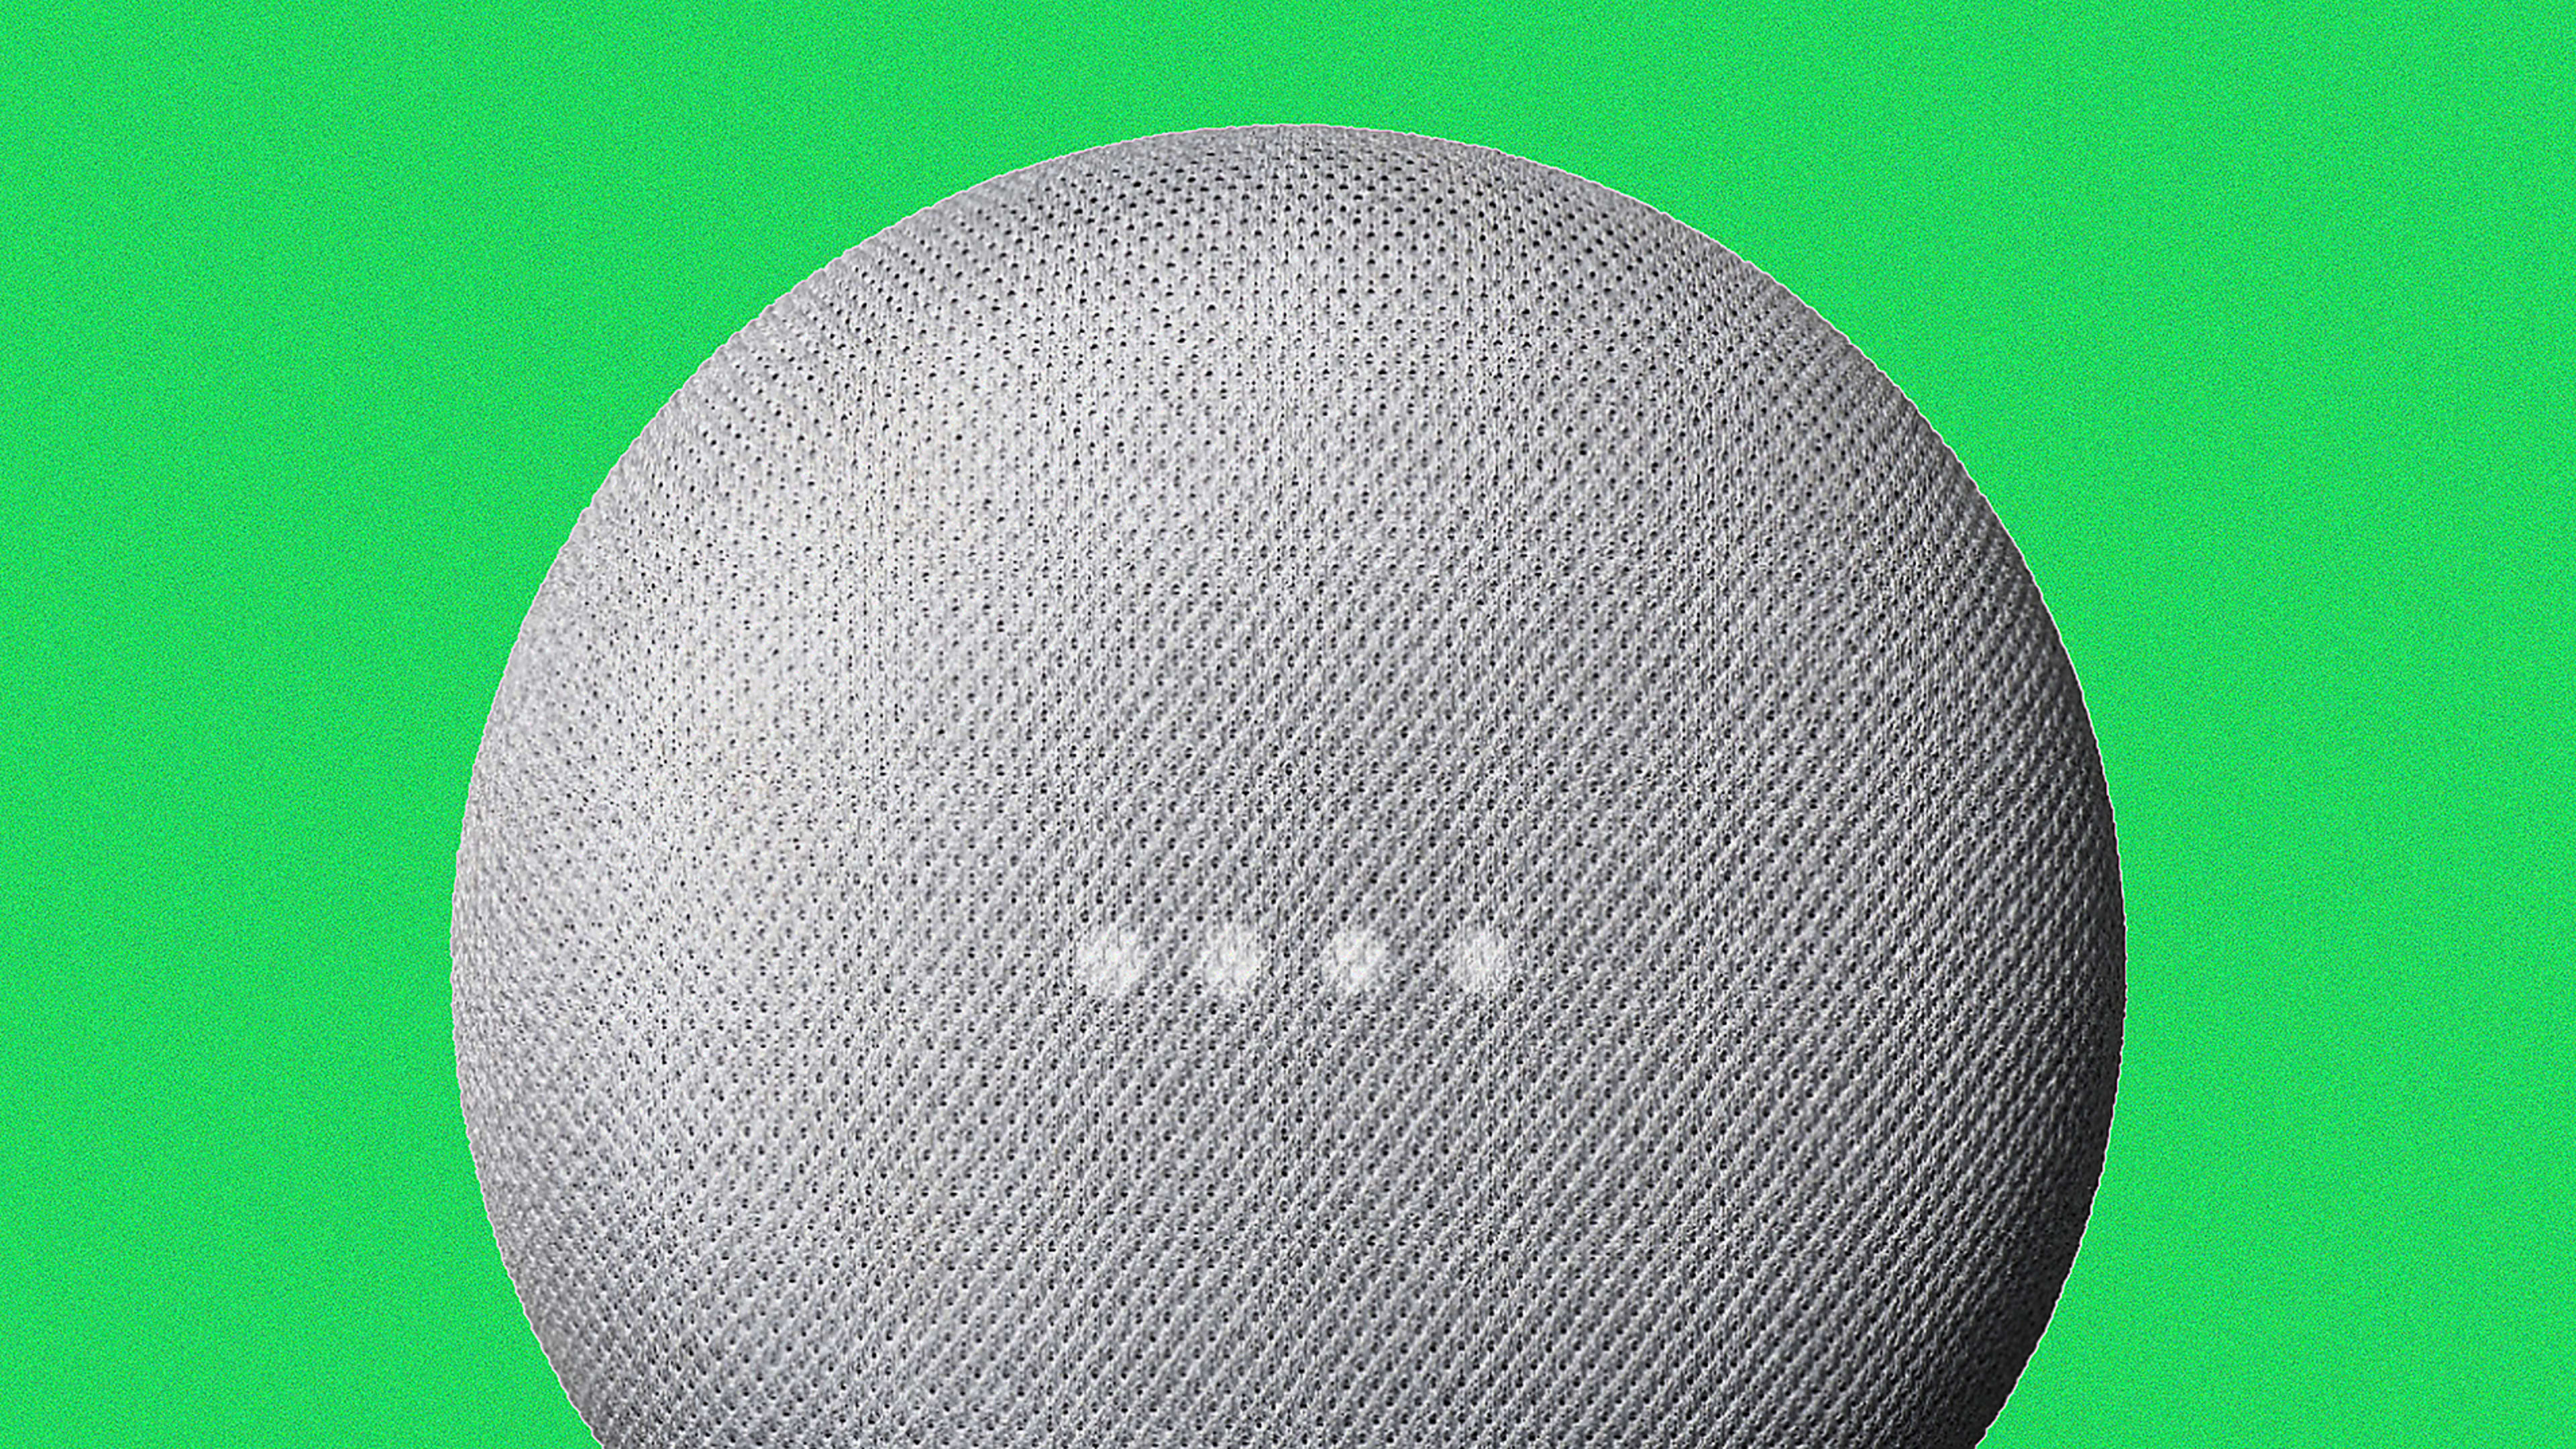 Here’s how to get your free Google Nest Mini from Spotify in the UK or Canada